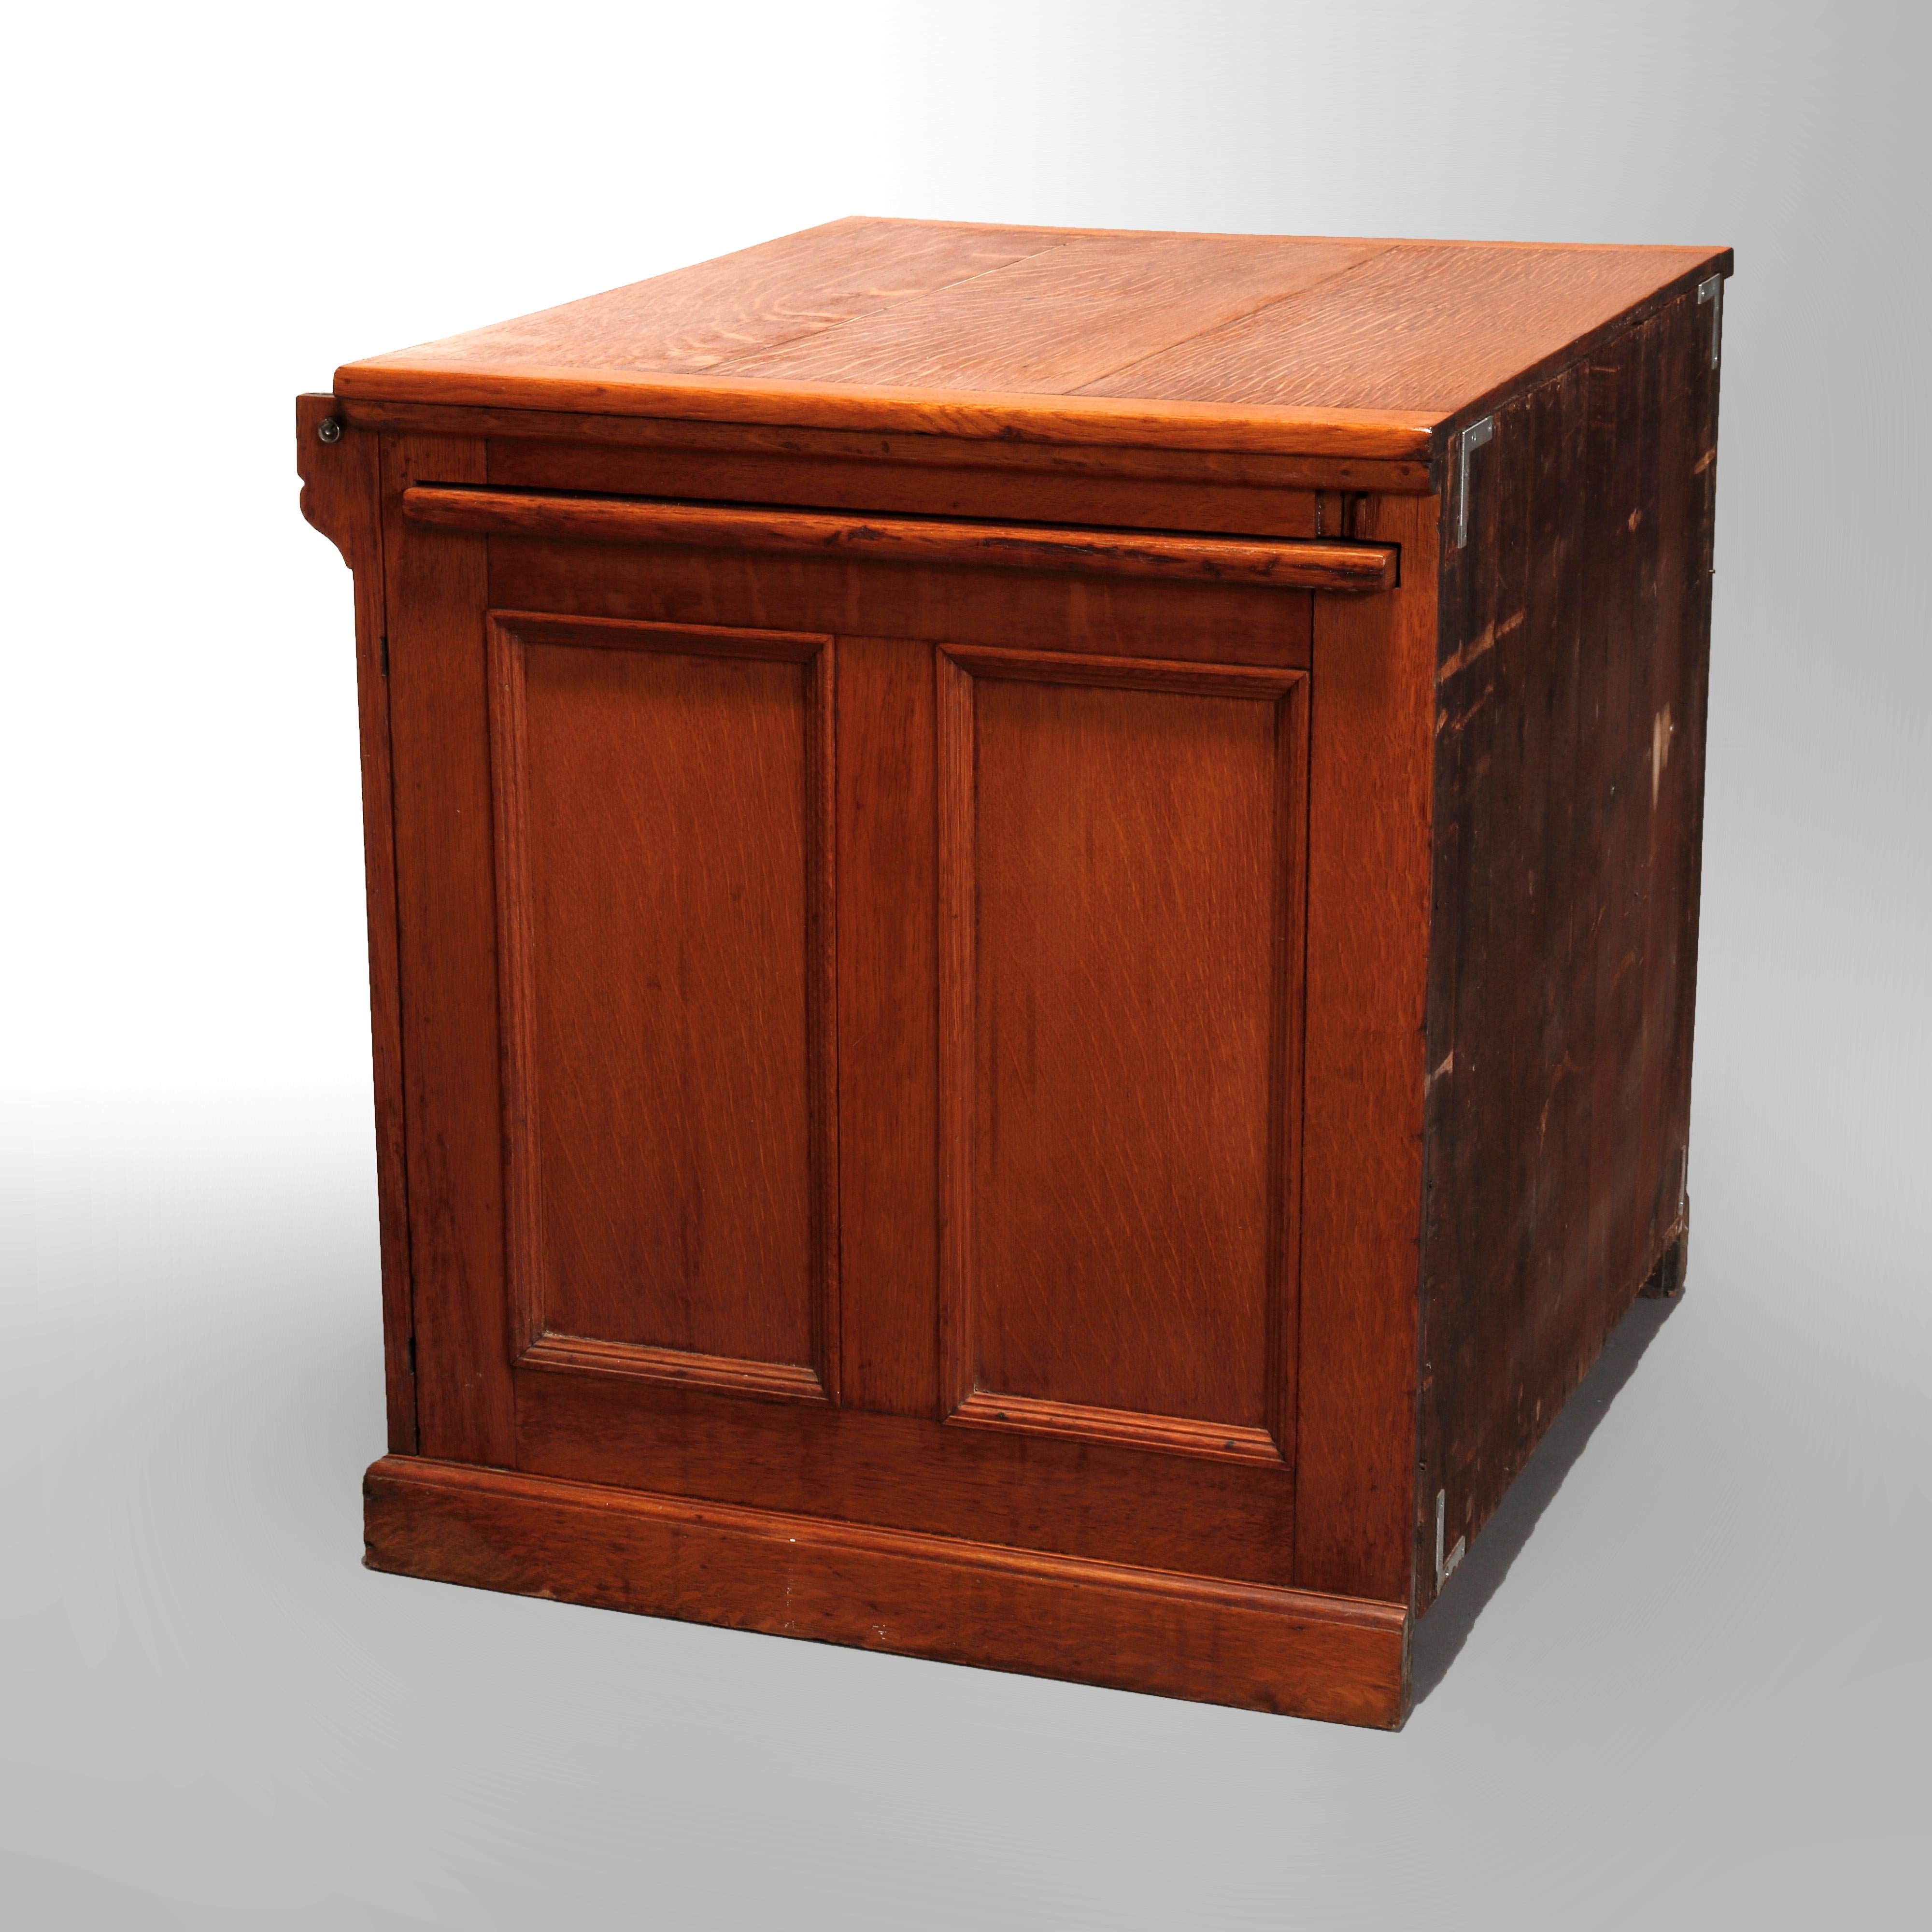 An antique library file cabinet in the manner of Macey offers oak construction with paneled case having four drawers with foliate carved cup handles and side slide out work tray, circa 1900.

Measures: 30